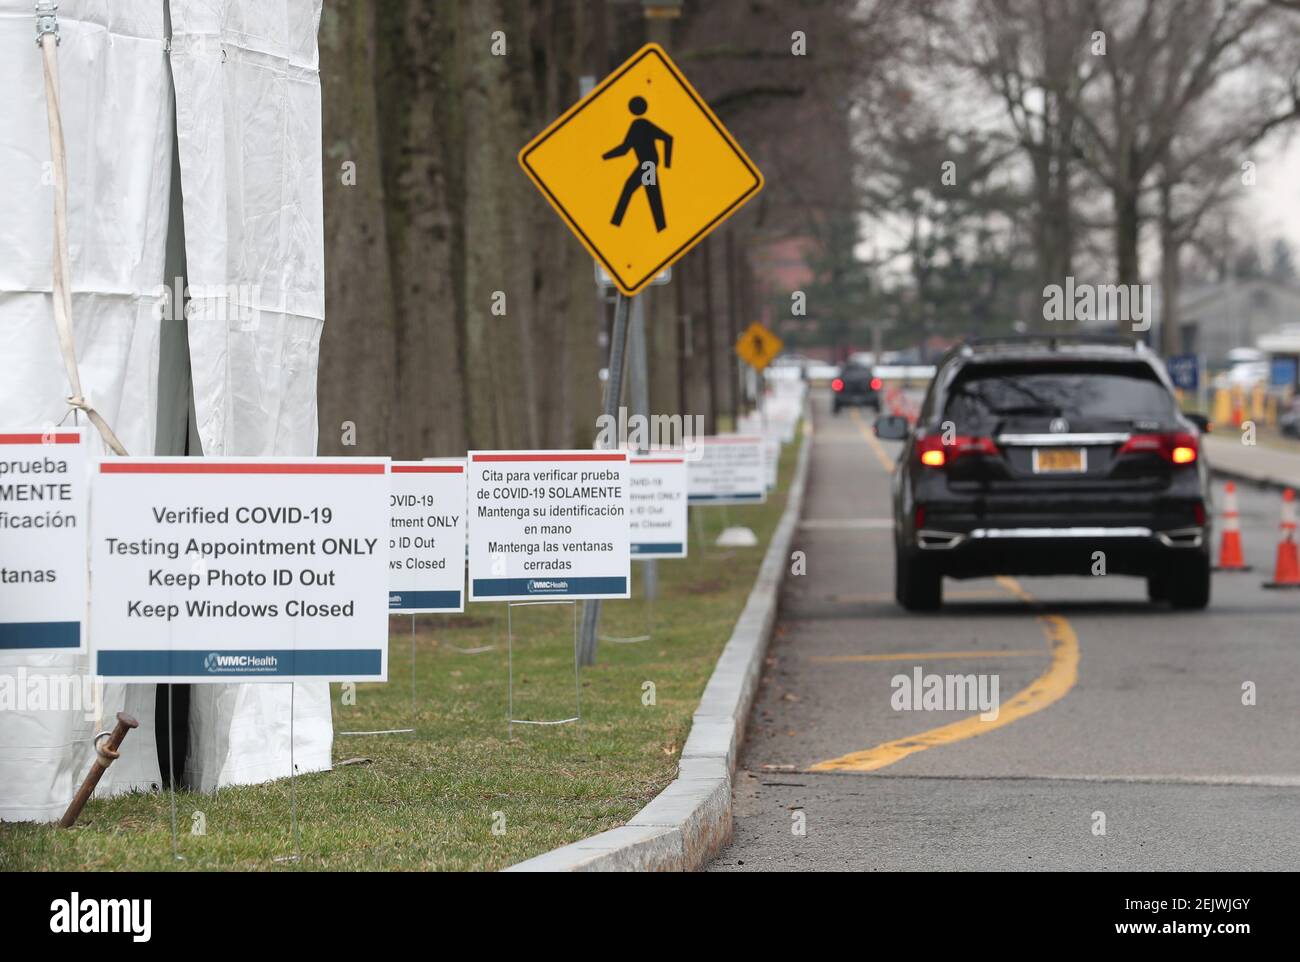 Mar 17, 2020; Valhalla, NY, USA; A car enters an area where tents are set up on the grounds of the Westchester Medical Center in Valhalla for Coronavirus testing by appointment only March 17, 2020. Mandatory Credit: Frank Becerra Jr./The Journal News via USA TODAY NETWORK/Sipa USA Stock Photo